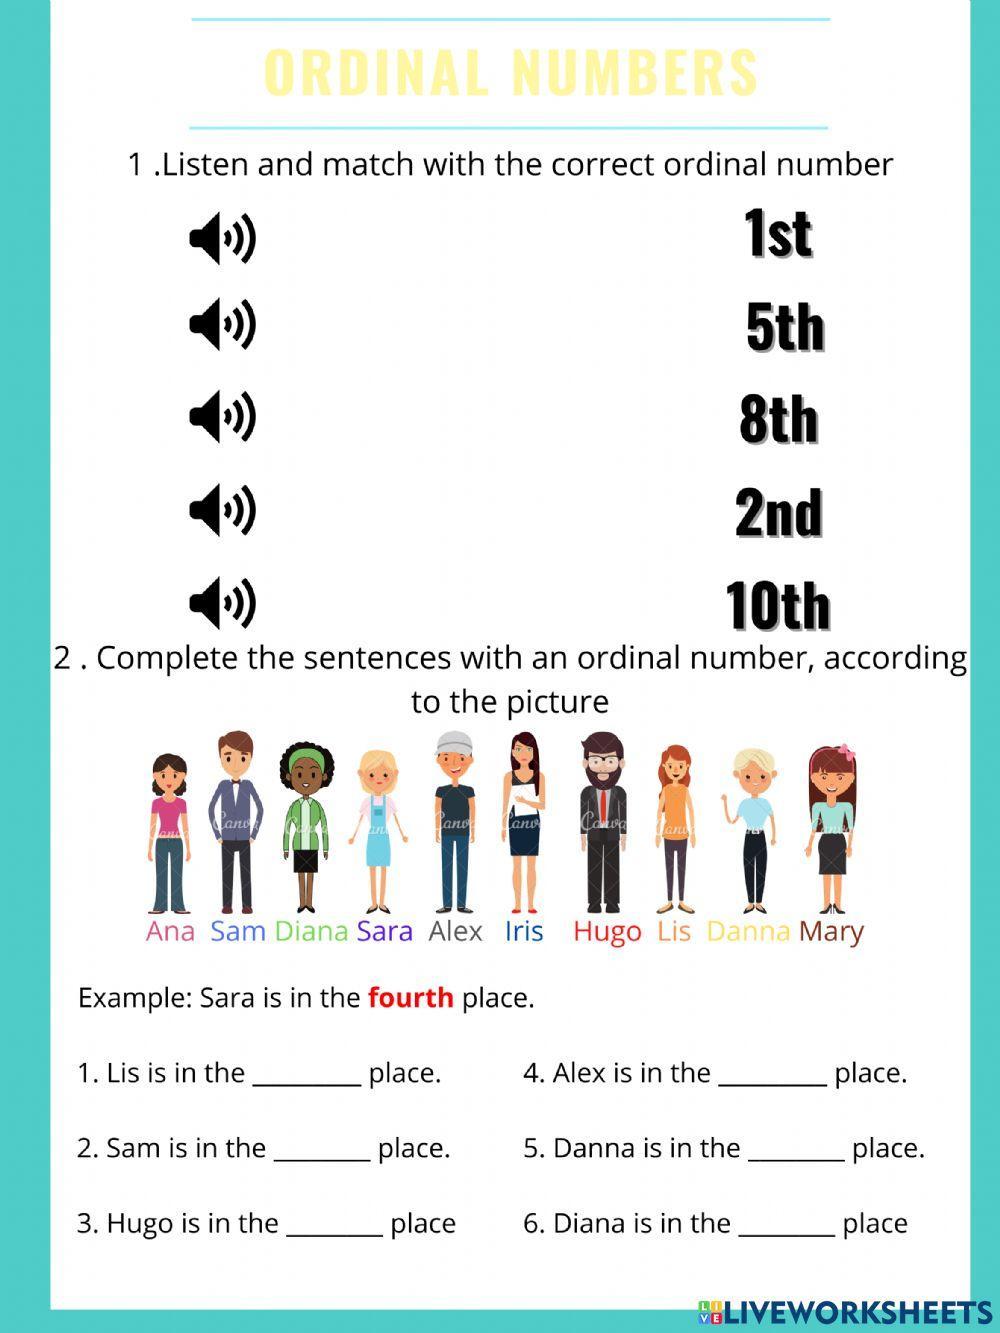 Ordinal numbers (1st-10th)